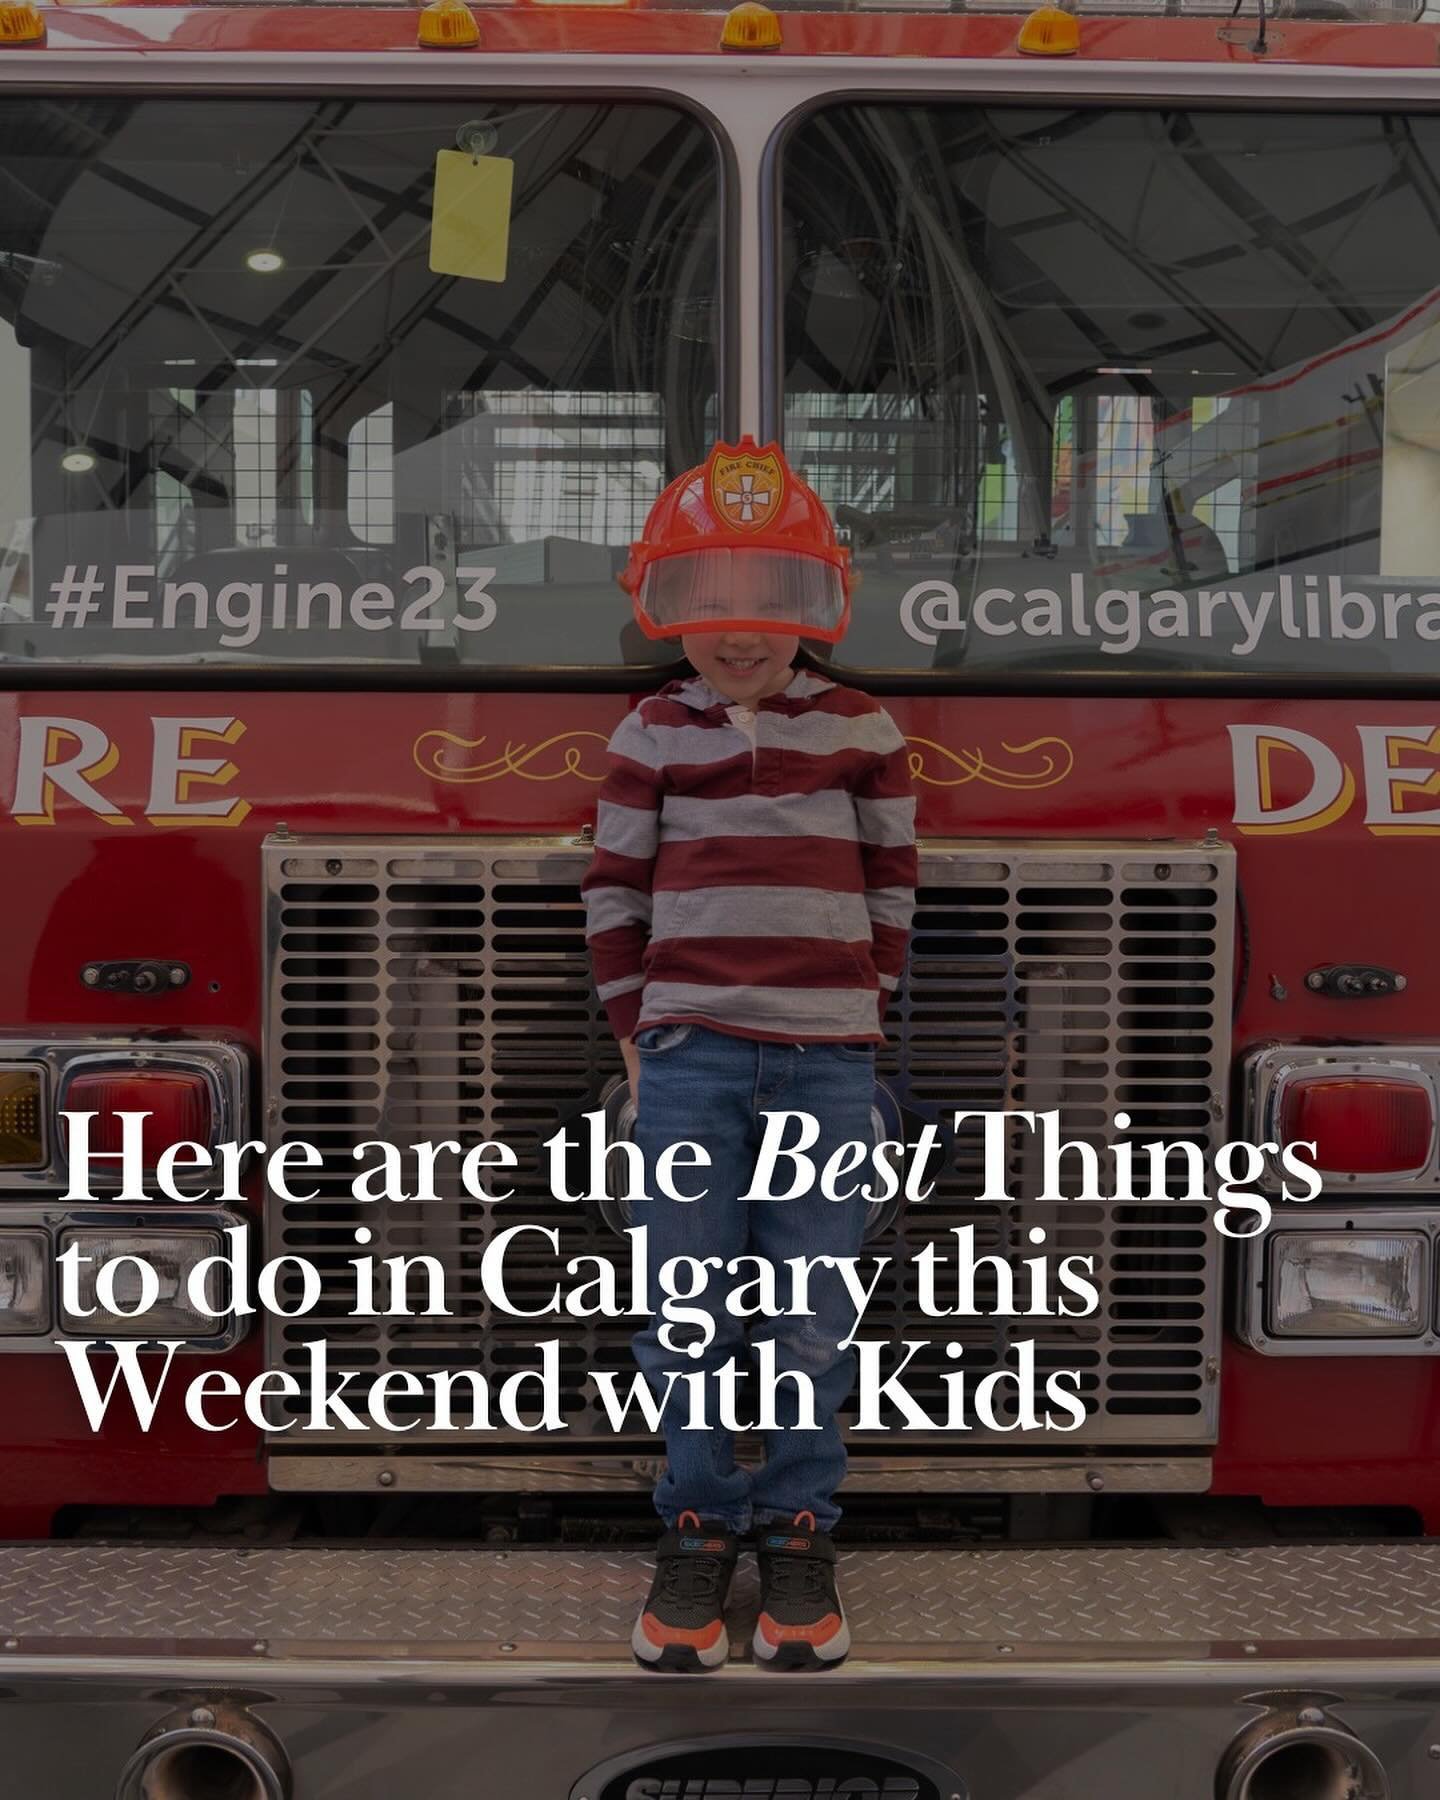 Join us every weekend as we share the best things to do in Calgary with kids. This weekend, you can catch a kids coding class, build FREE LEGO Friendship bracelets, Engine 23 Opening Party, a Teen HIP HOP Class, and a FREE Tie-Dye craft sesh. Find th